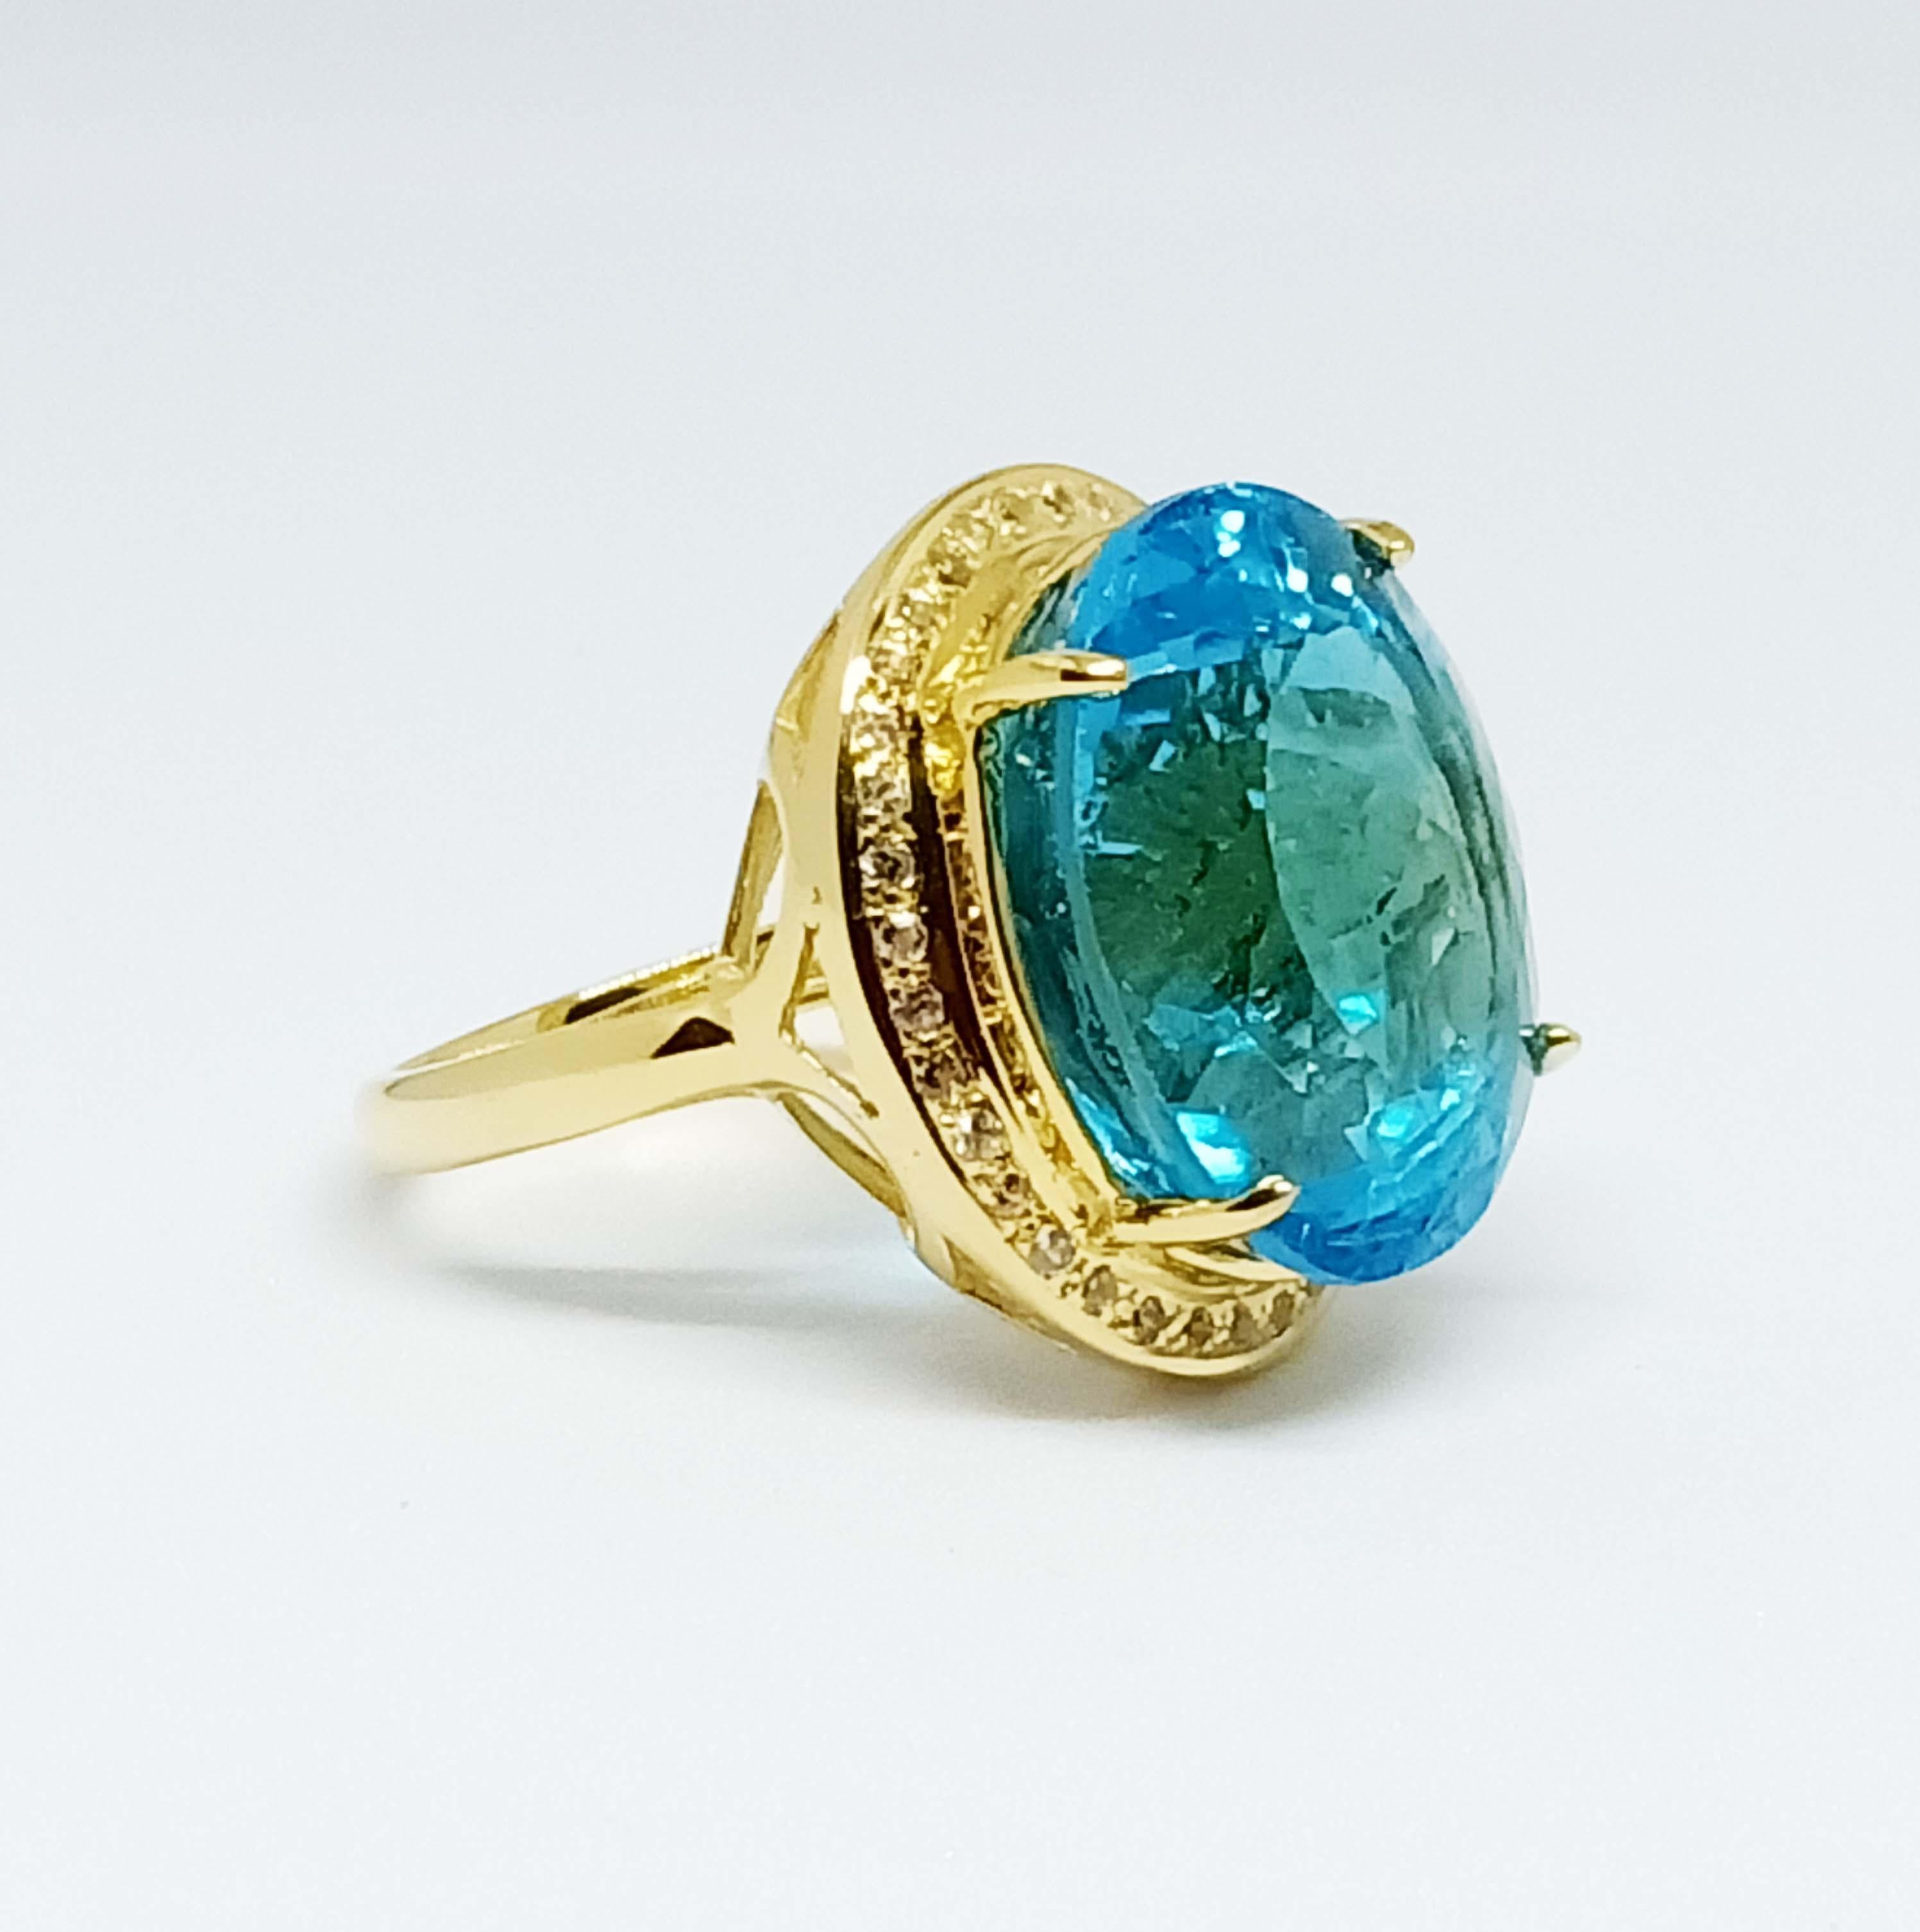 25.19 cts Swiss BlueTopaz Sterling Silver In 18K Gold Plated For Sale 1